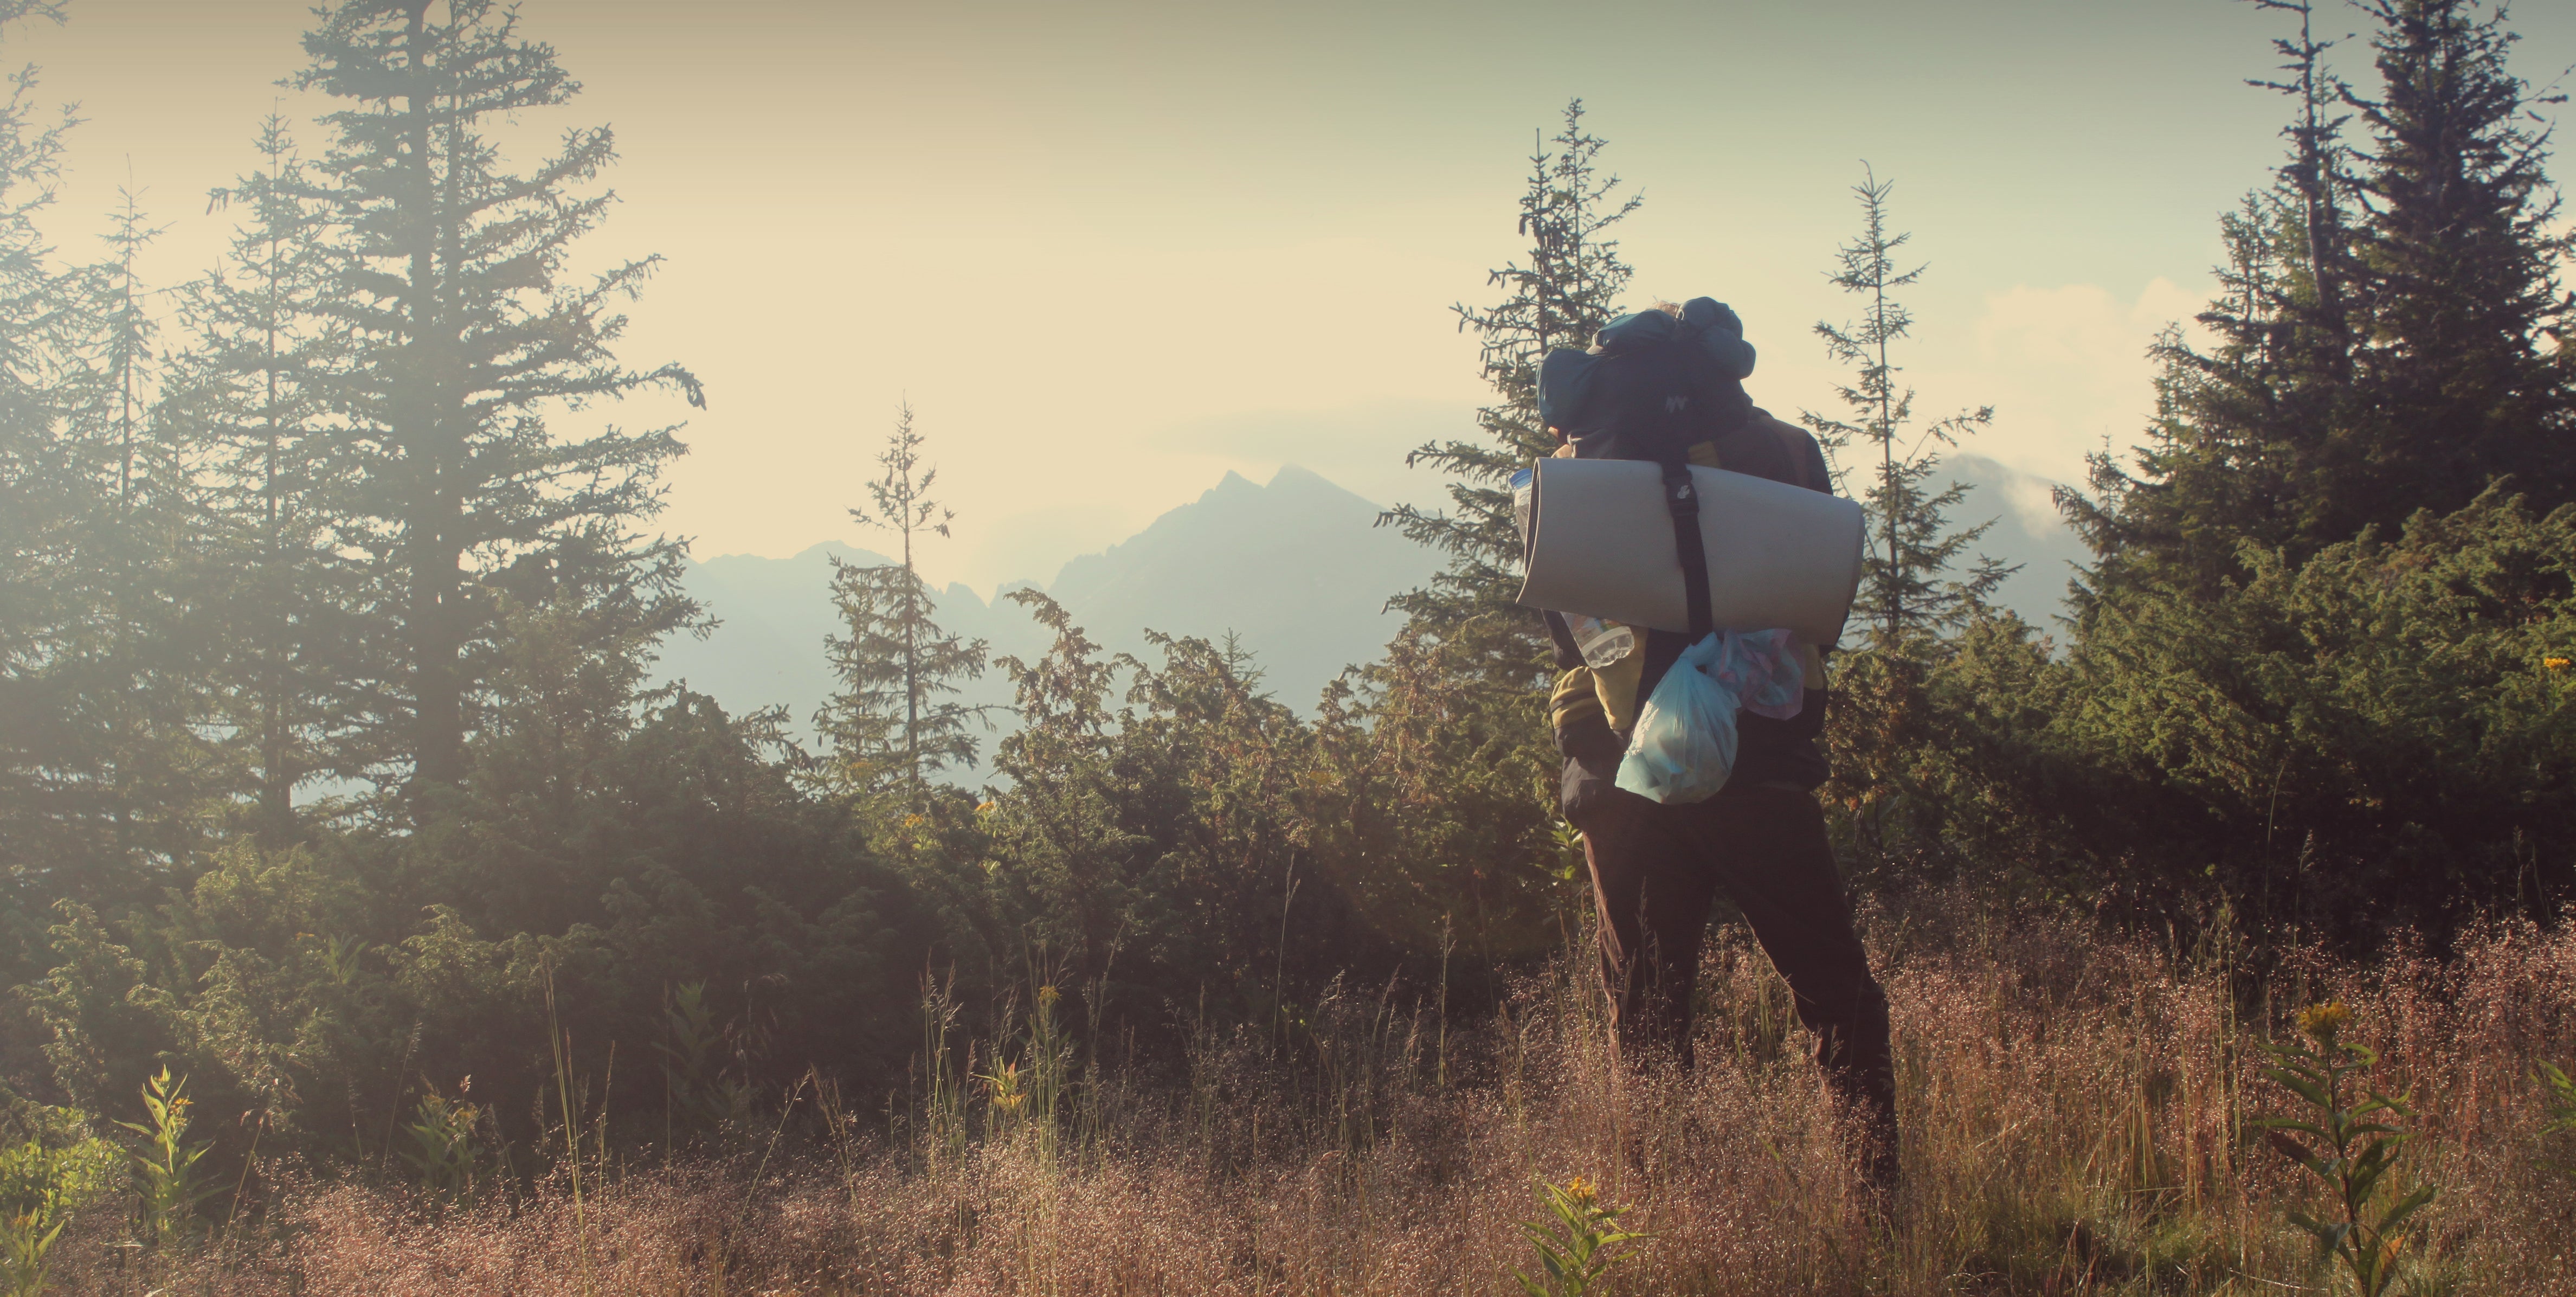 8 VERY VITAL Pieces of Gear Every Backpacker Will Definitely Need